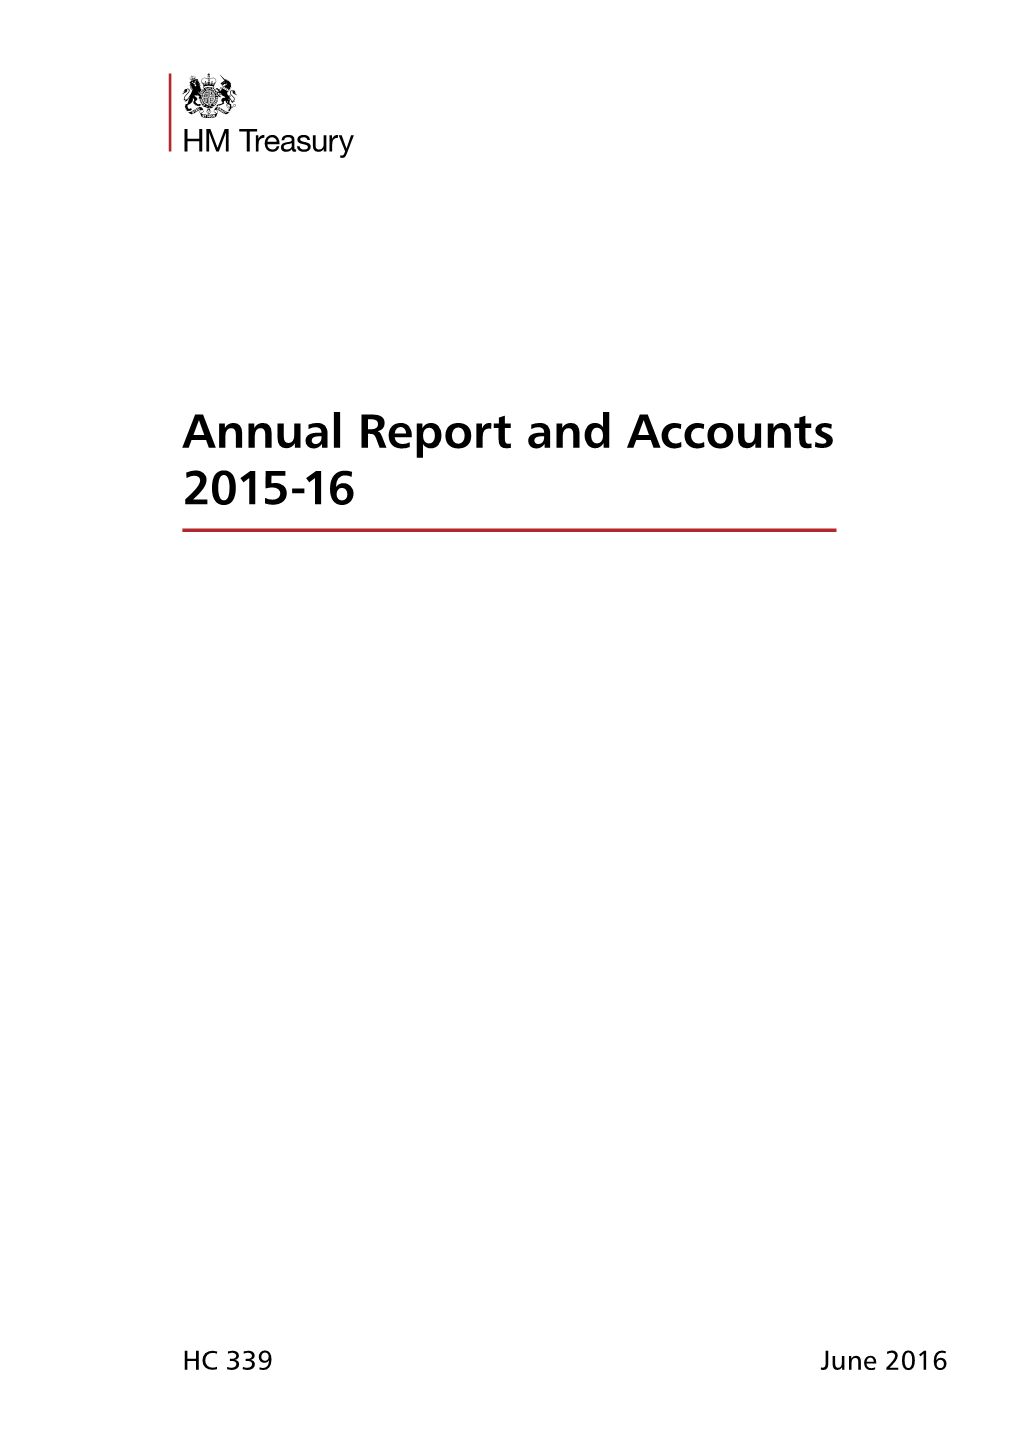 HM Treasury Annual Report and Accounts 2015-16